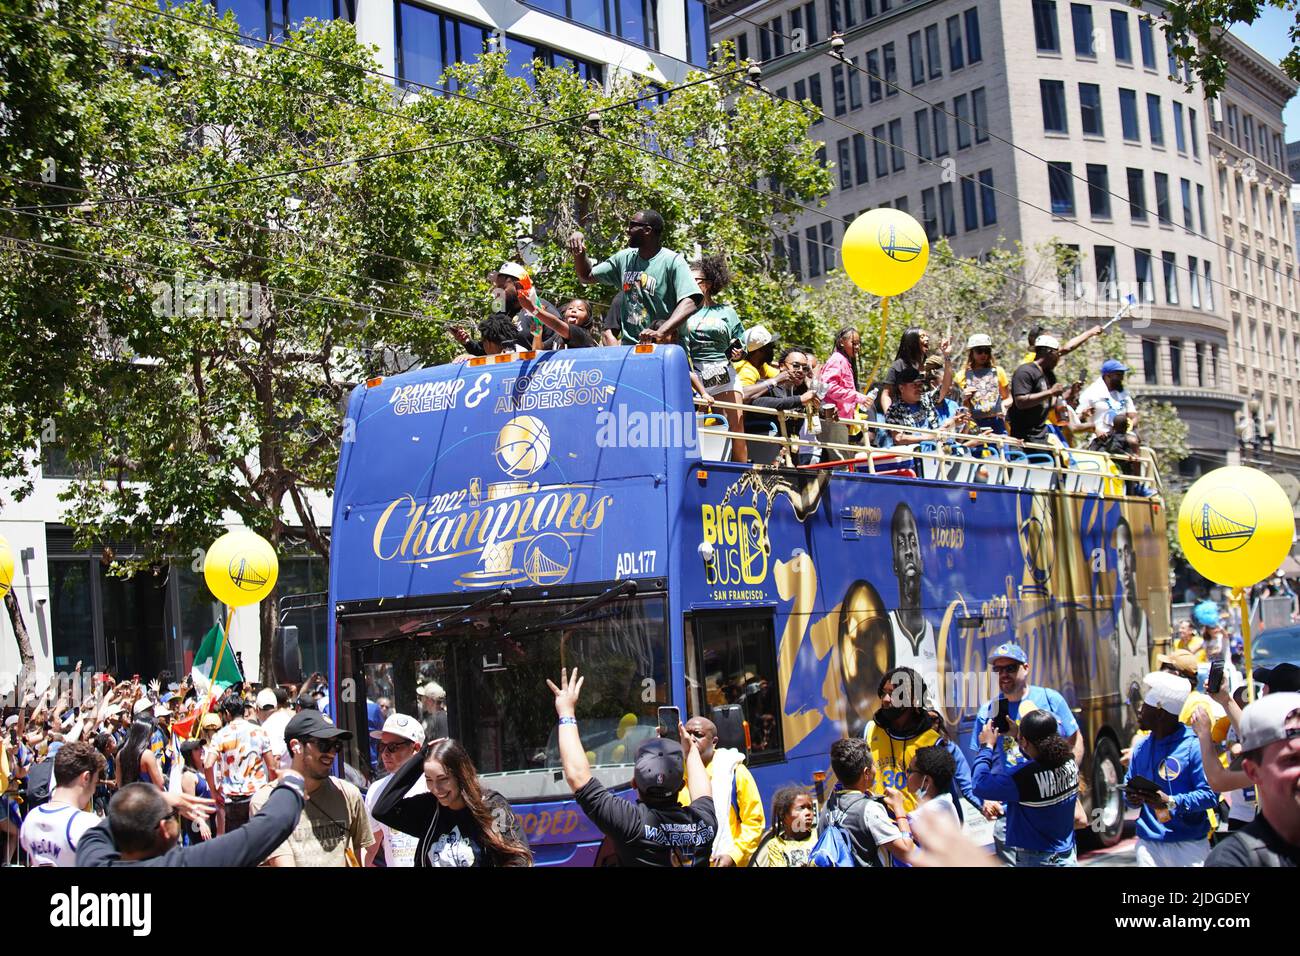 Best moments from Warriors' championship parade